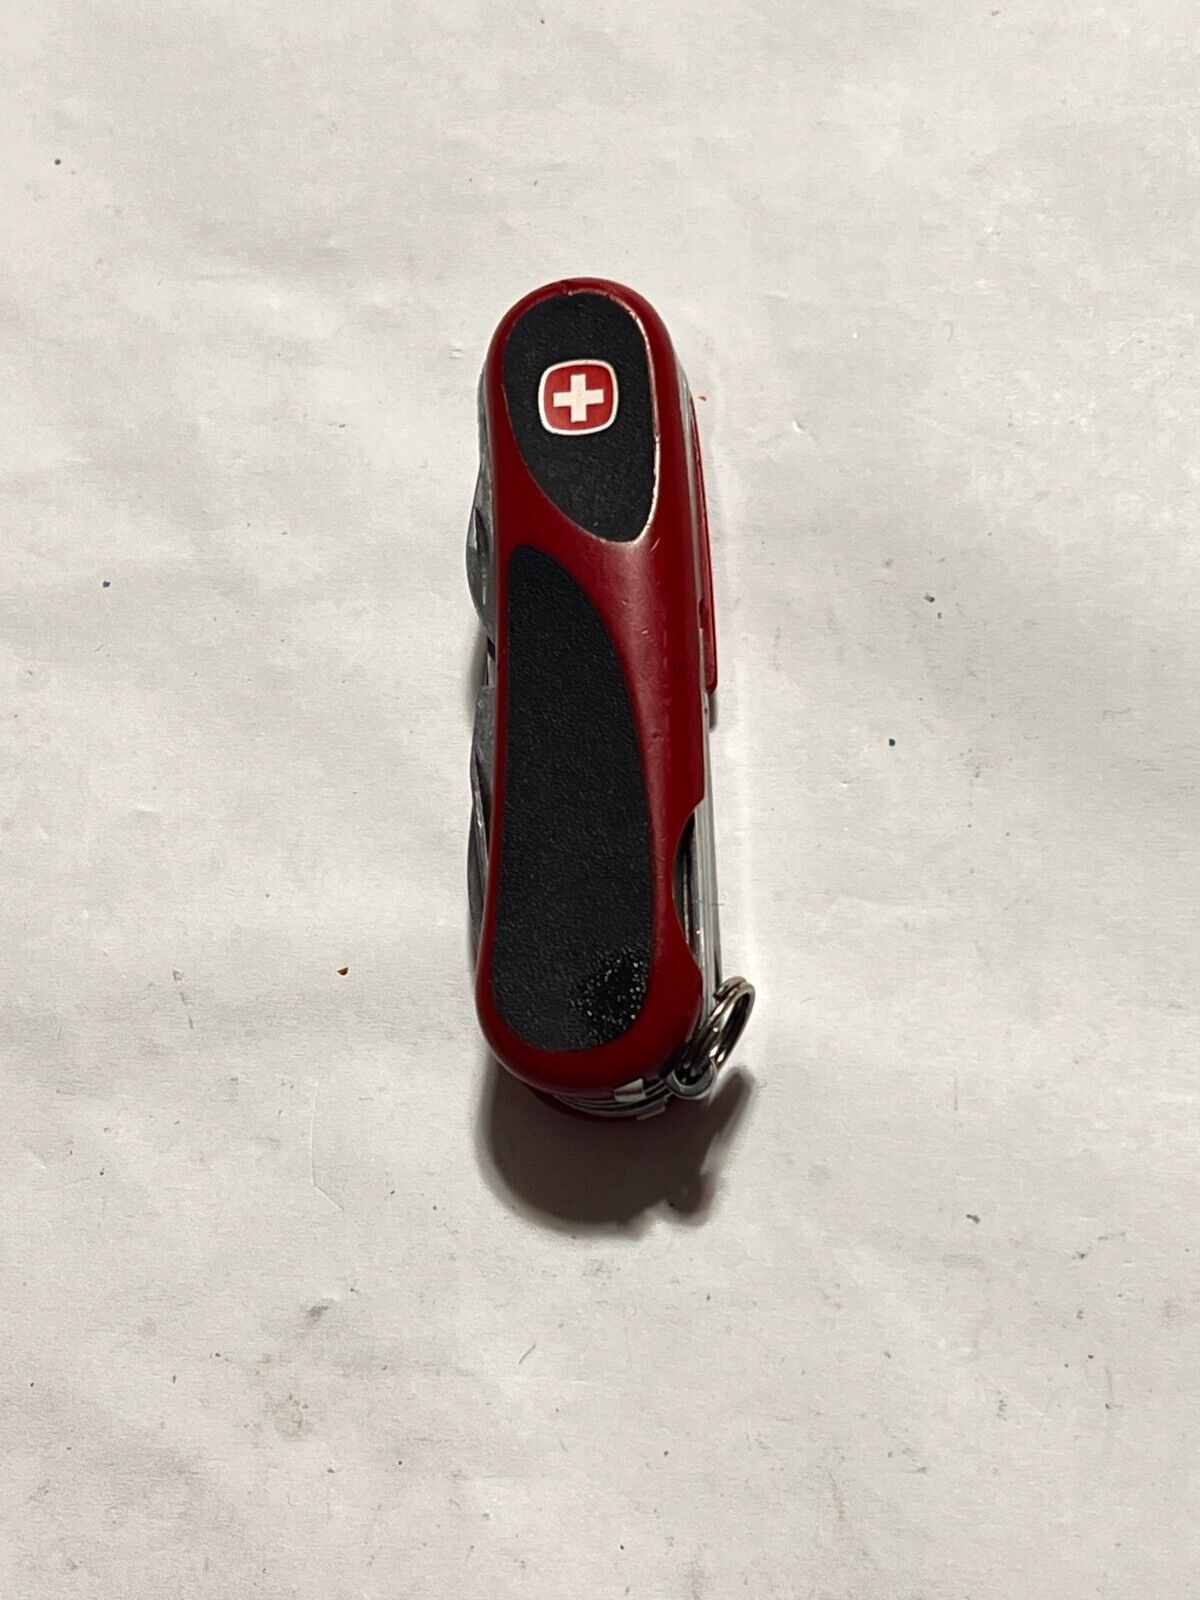 Wenger Delemont EVO Grip 18 Swiss Army knife Red